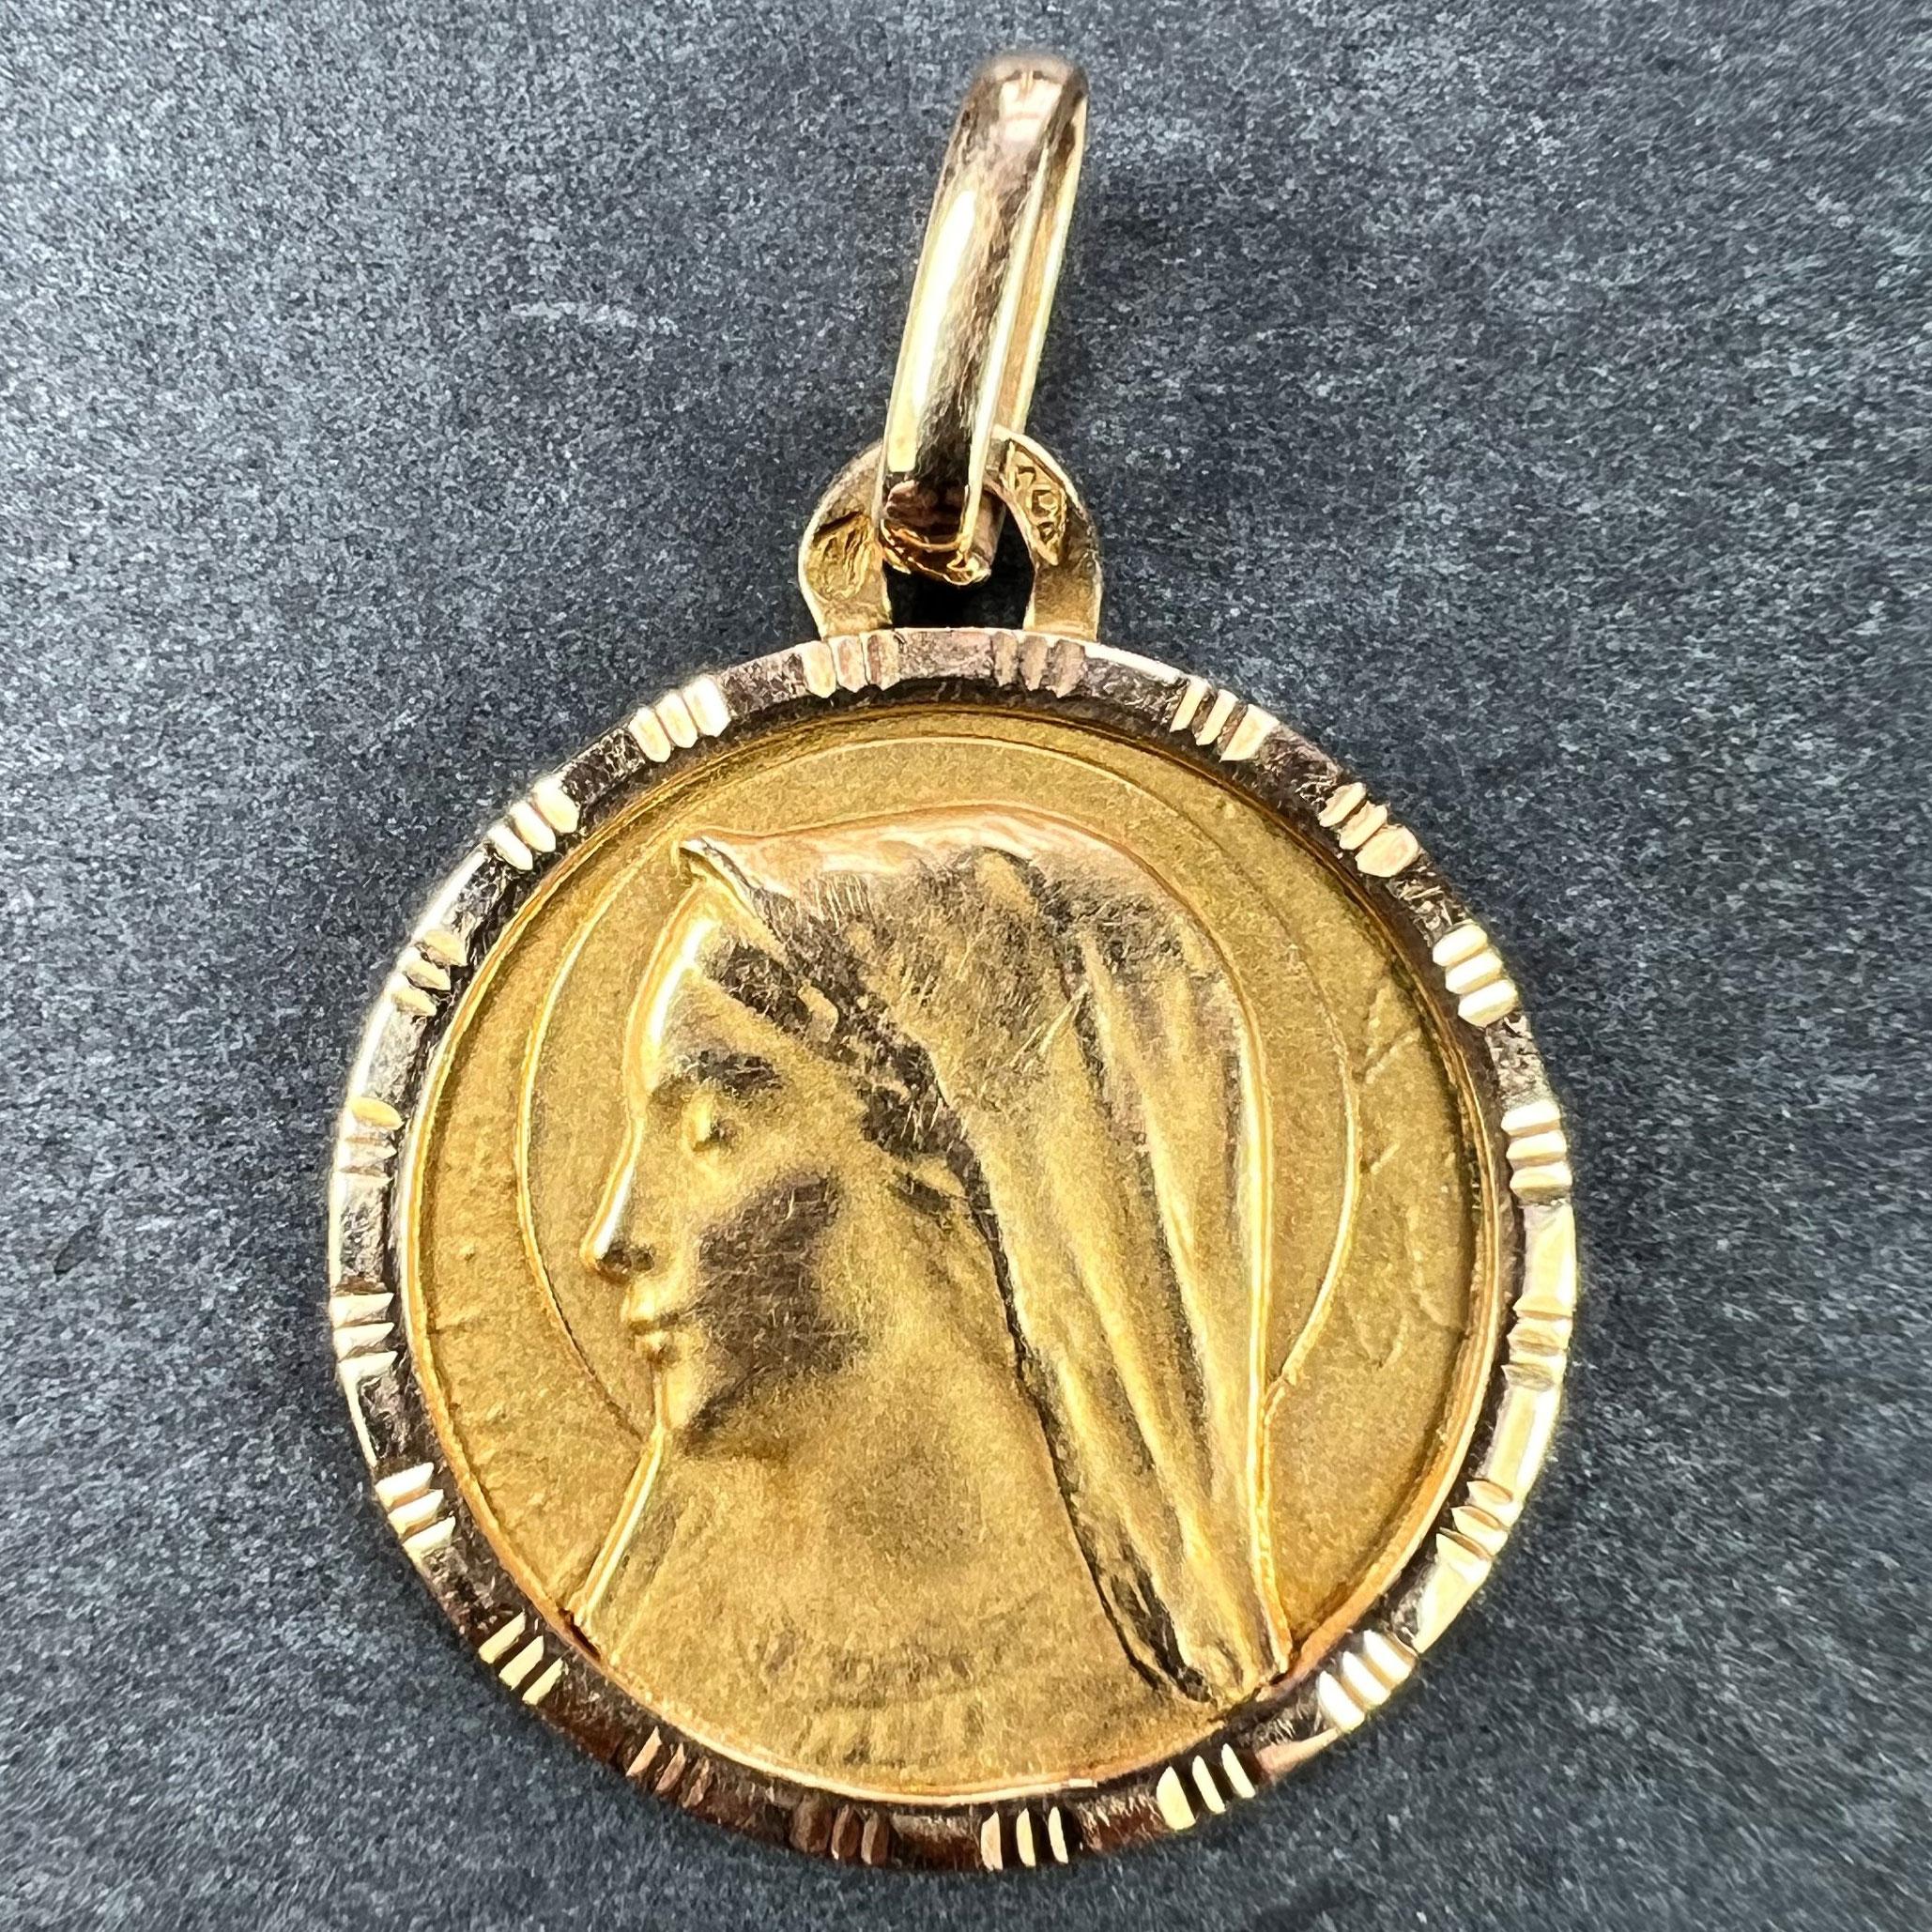 A French 18 karat (18K) yellow gold charm pendant designed as a medal depicting the Virgin Mary within a ridged and engraved frame. Stamped with the eagle's head mark for 18 karat gold and French manufacture and the maker's mark for